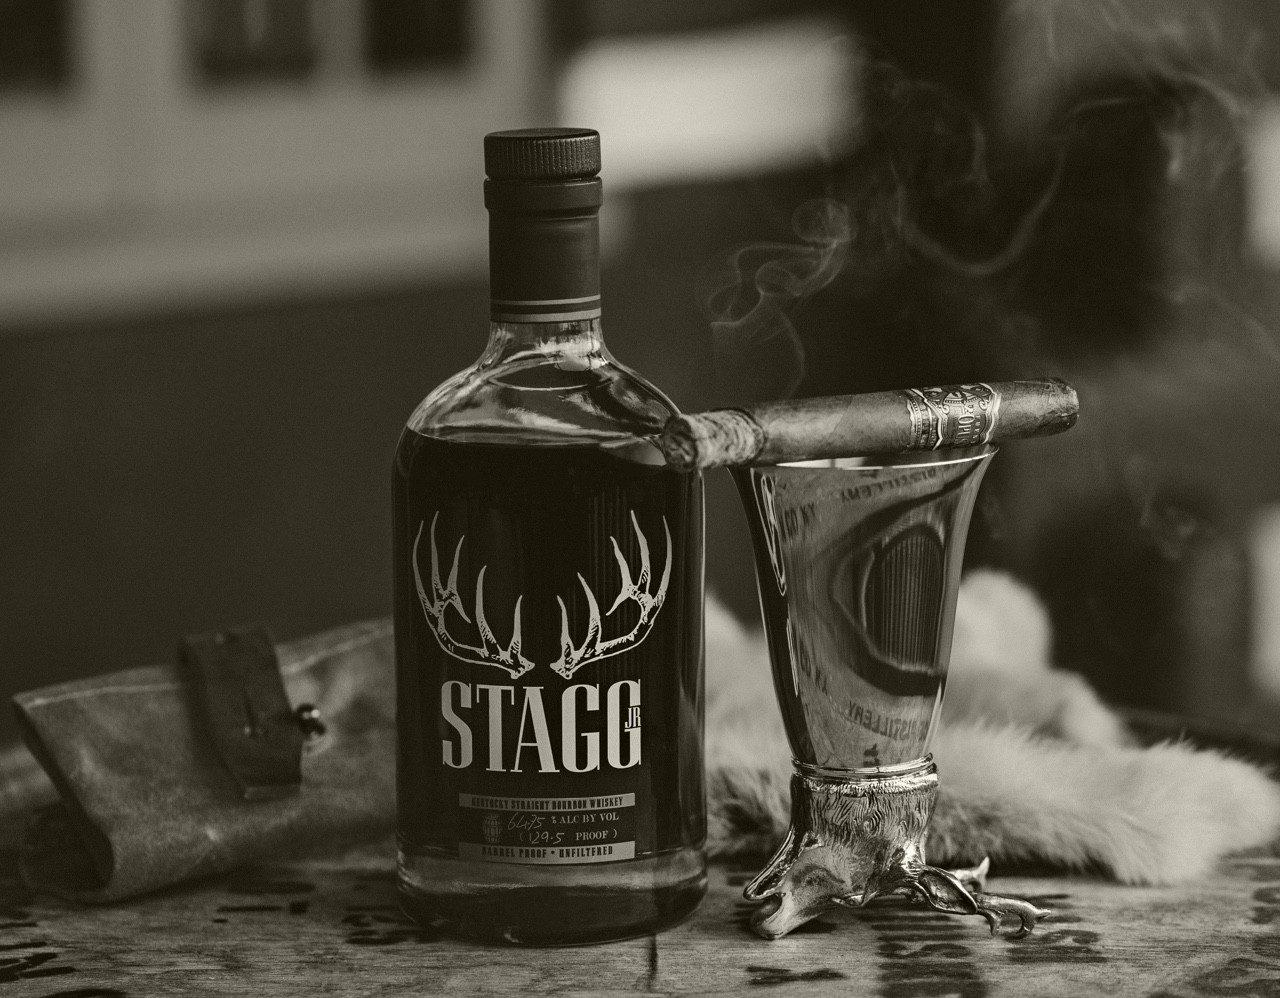 A cigar being smoked with a glass of Stagg Bourbon